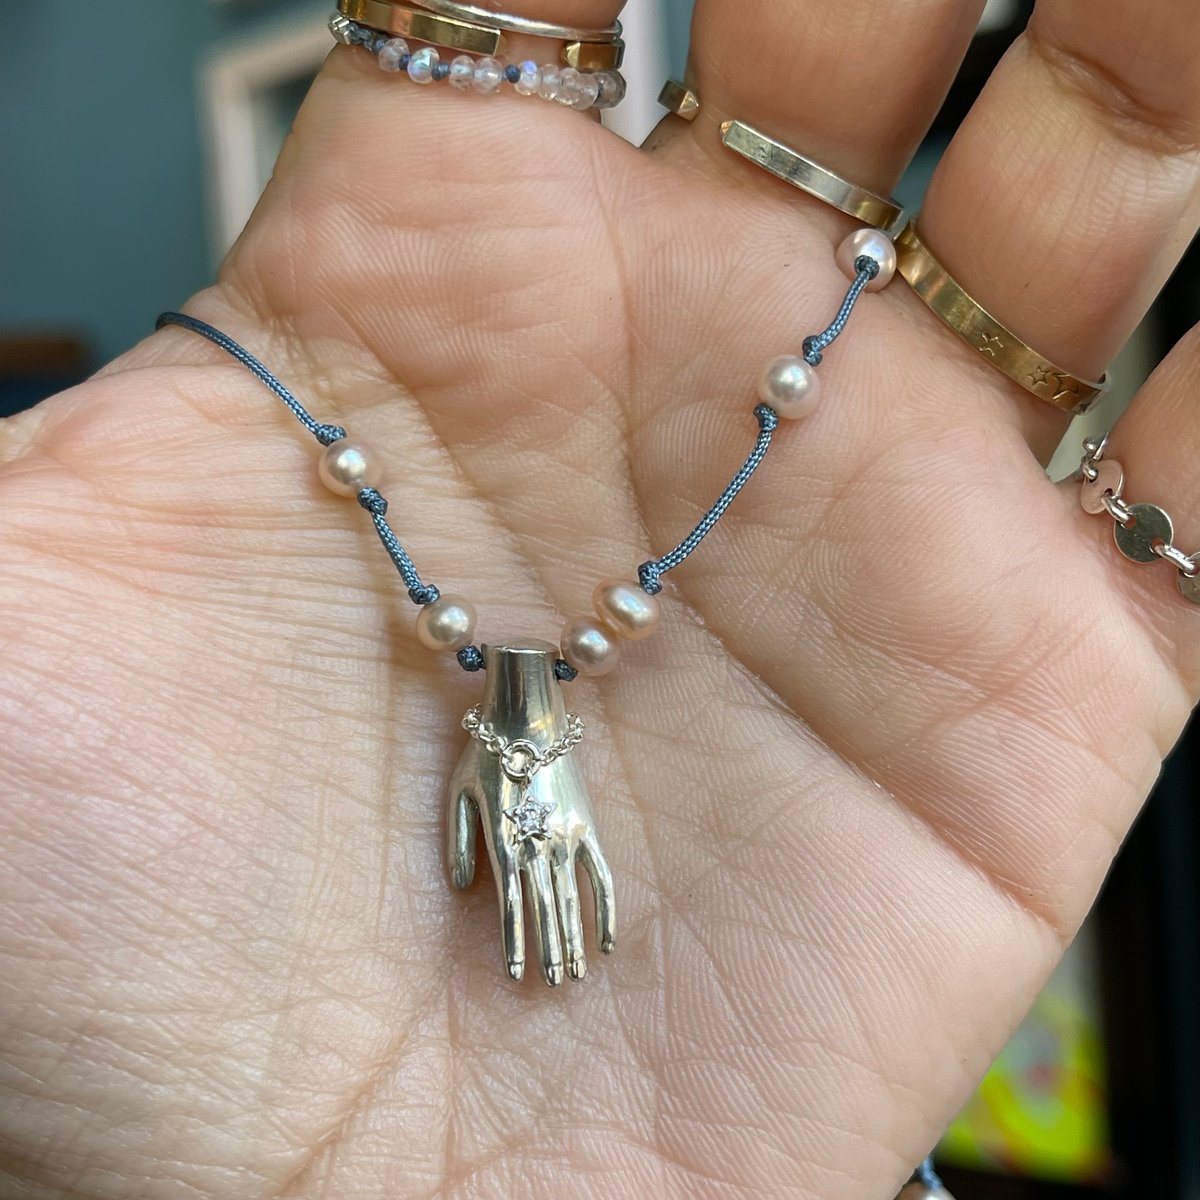 Image of hand necklace with pearls